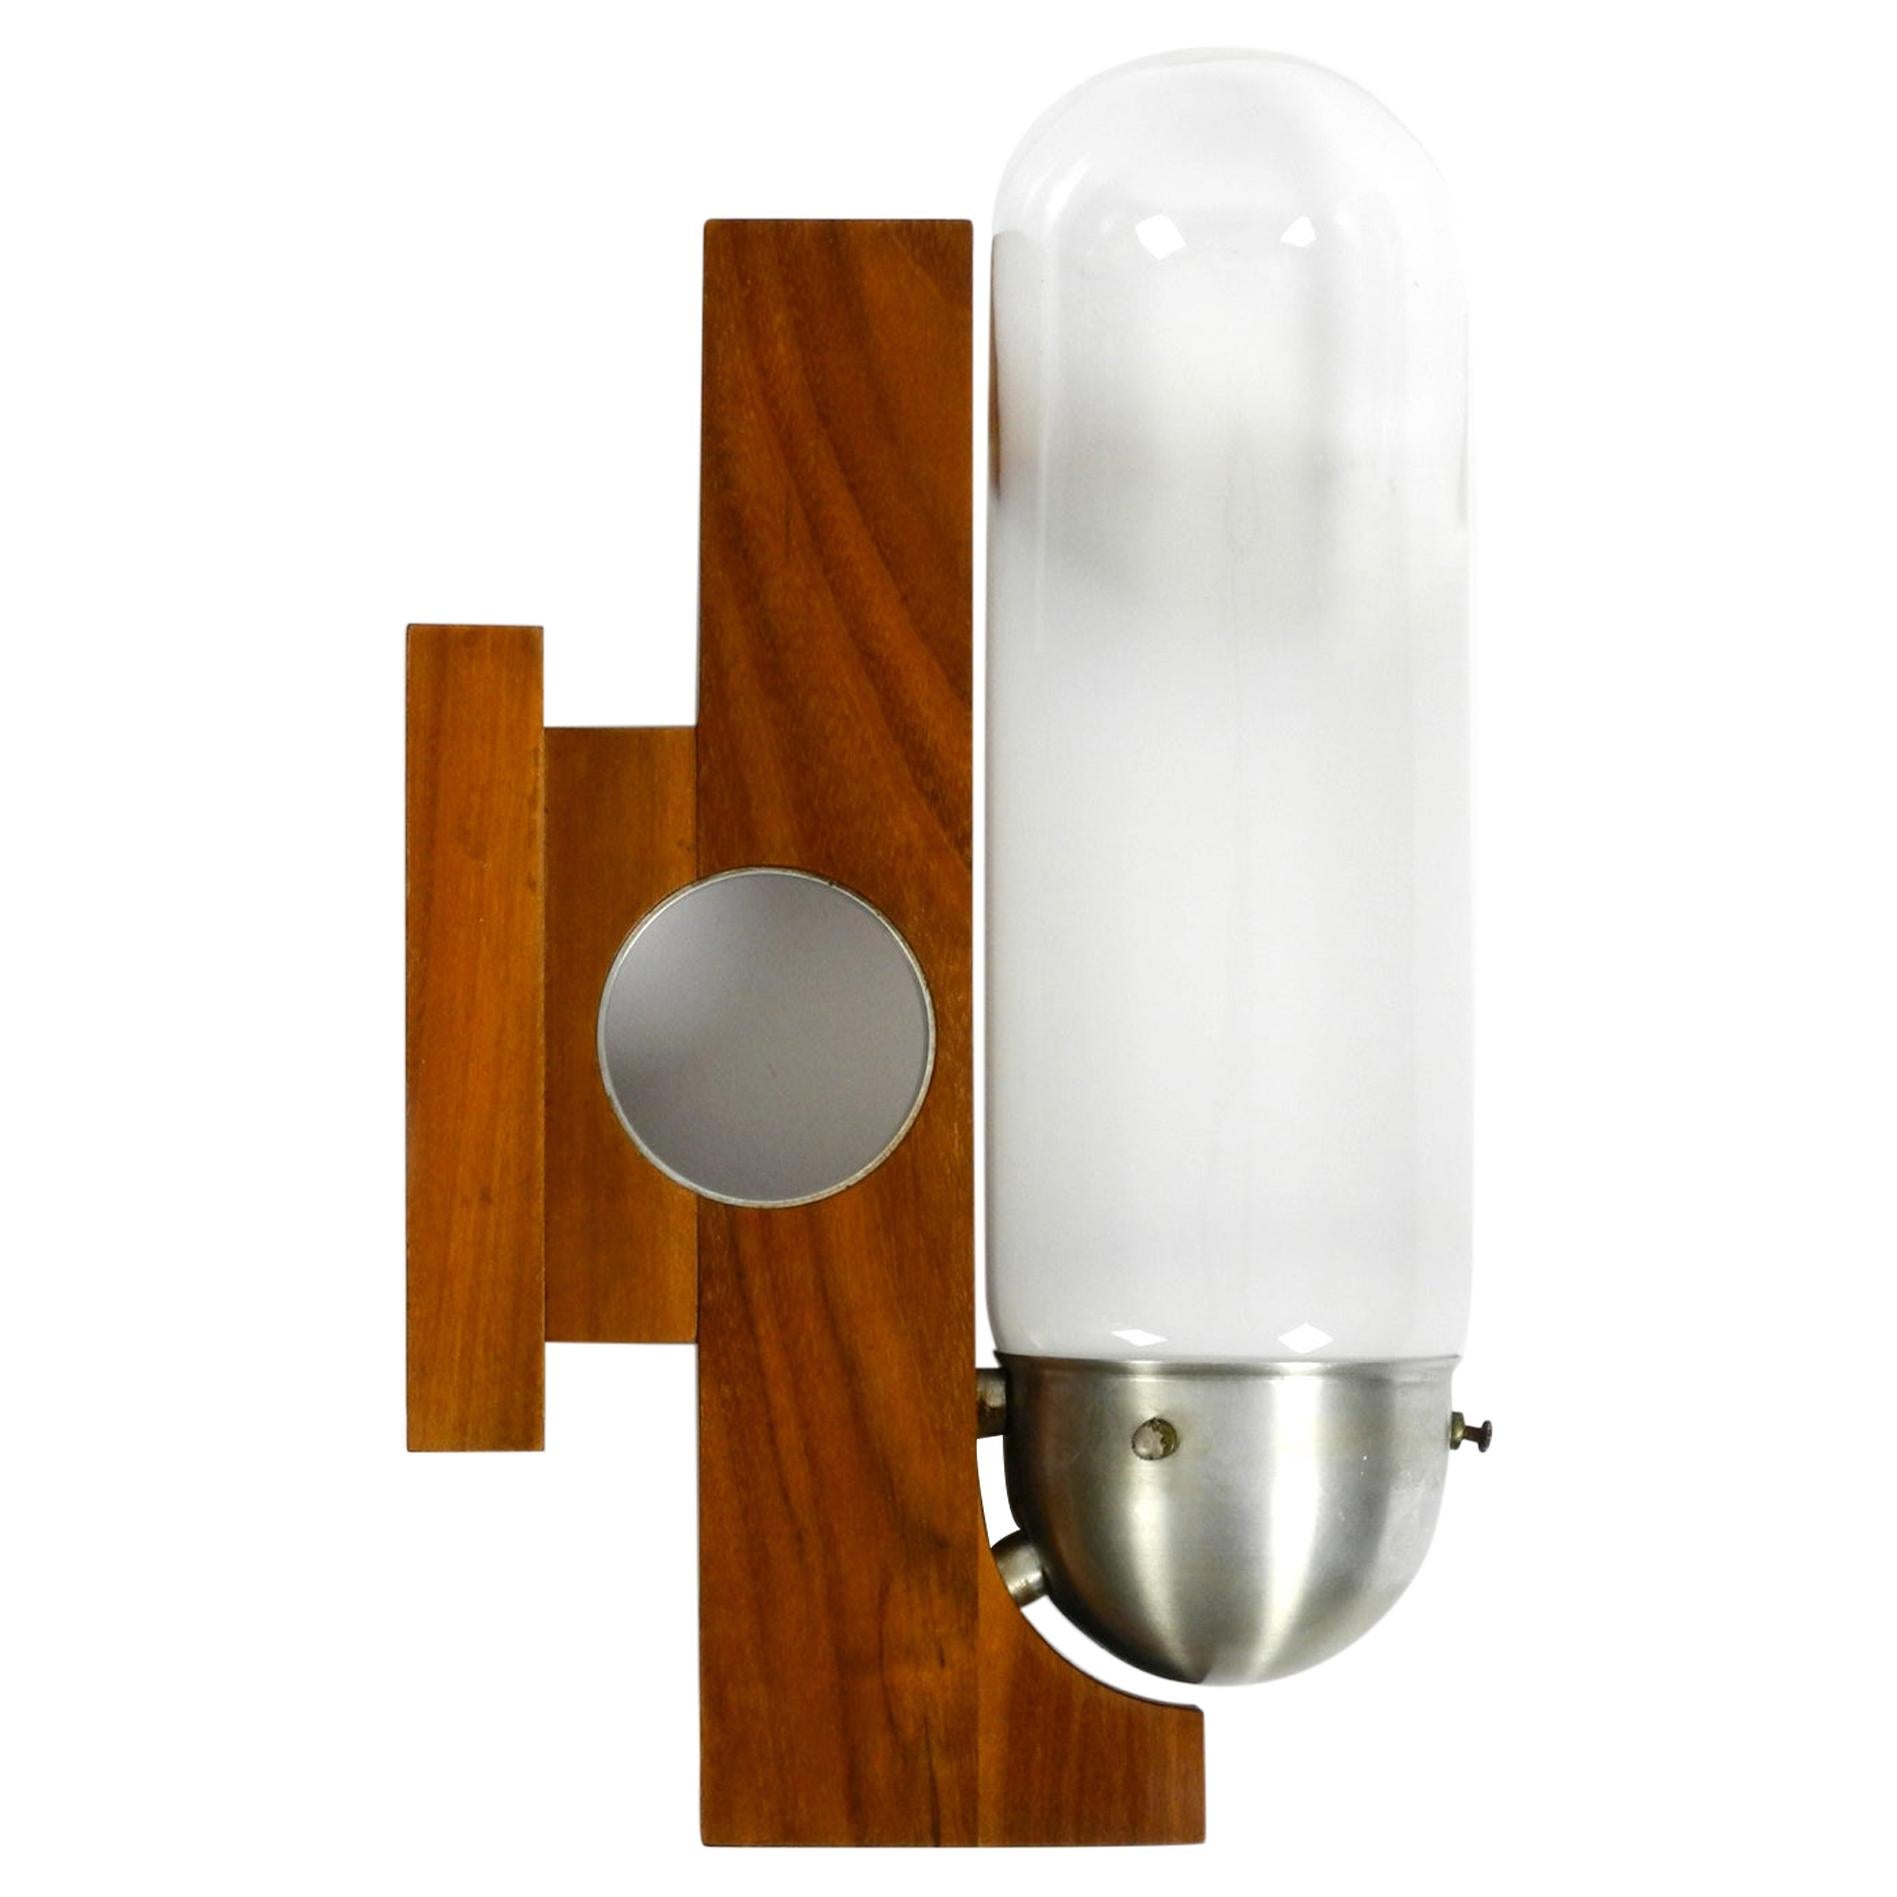 Rare Mid-Century Modern Wood Wall Lamp with Glass Shade in Art Deco Design 